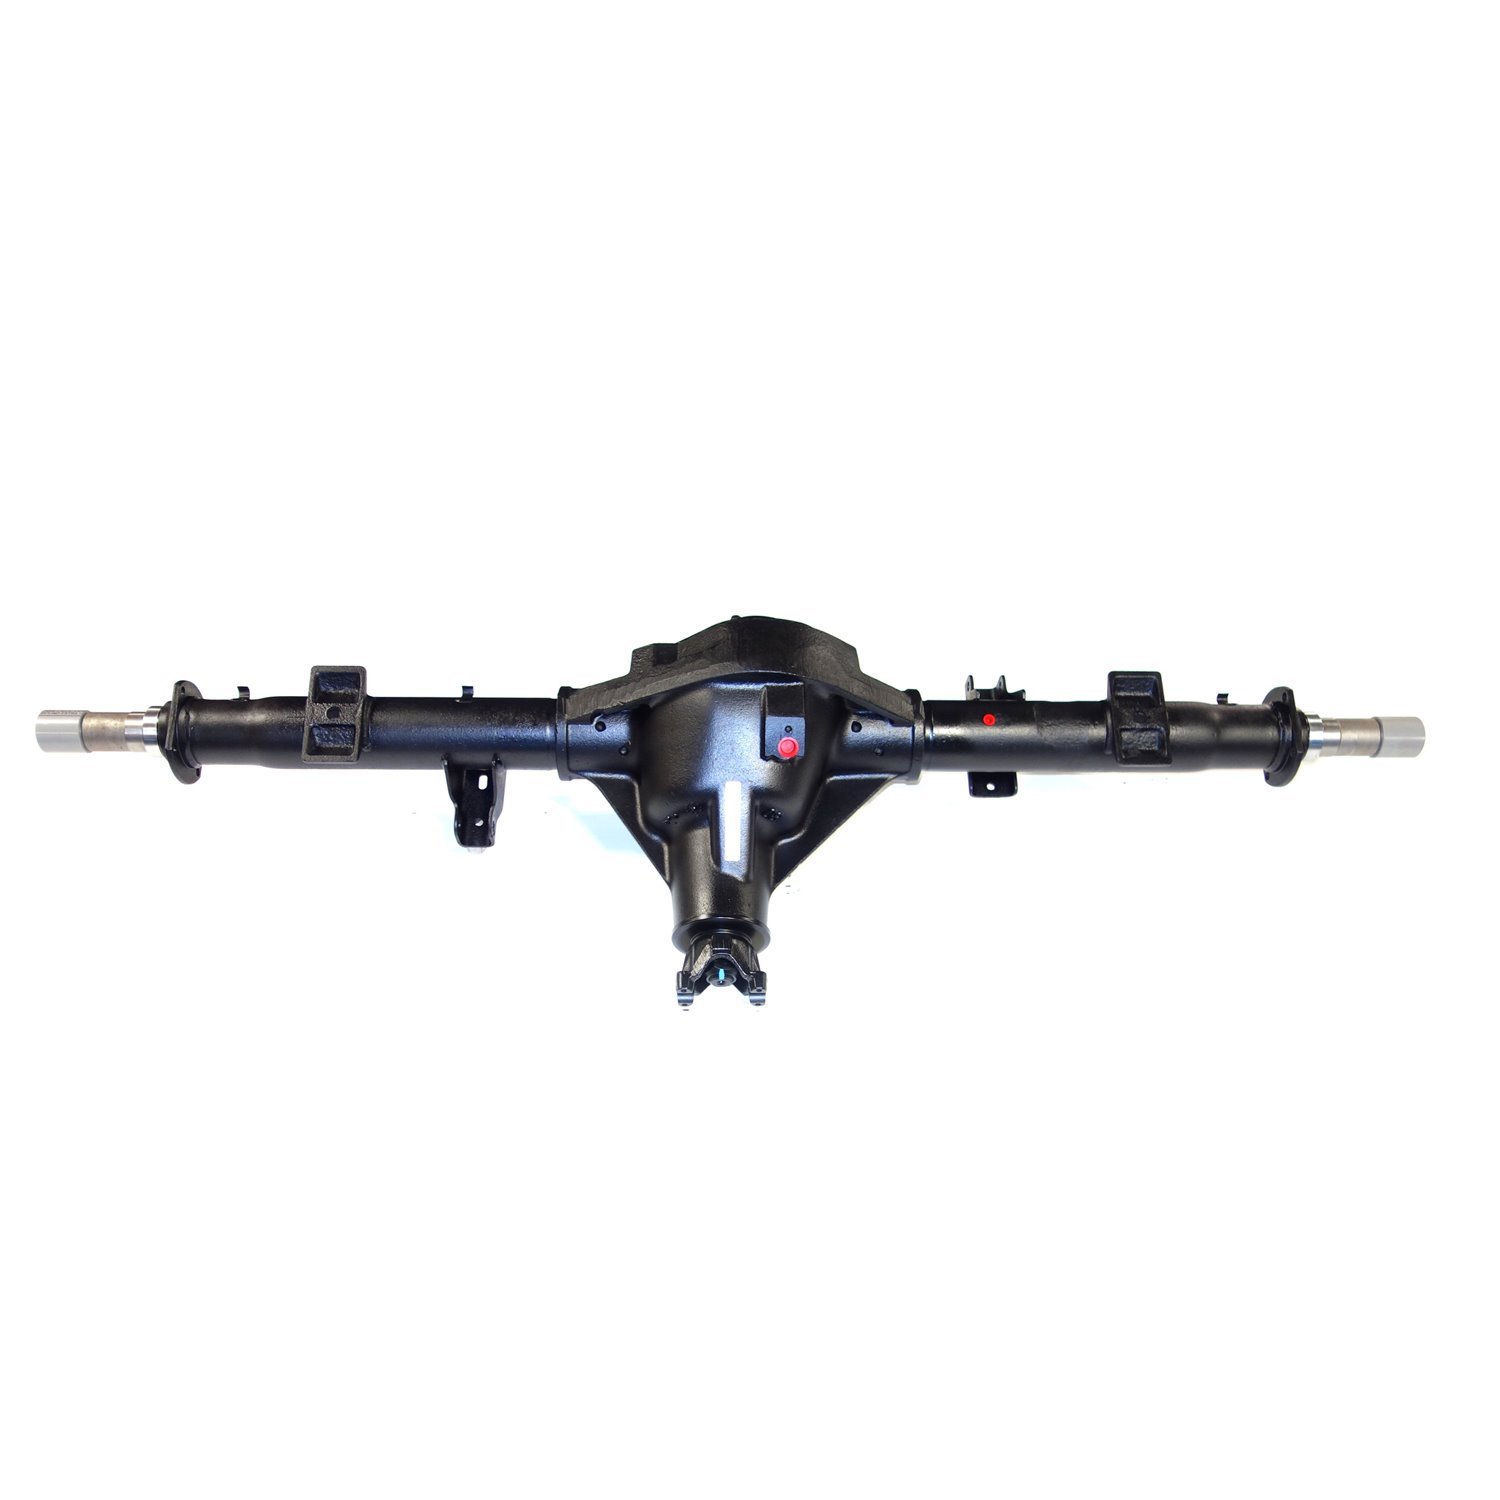 Remanufactured Complete Axle Assembly for Dana 80 96-99 Dodge Ram 3500 4.11 Ratio, 4x4